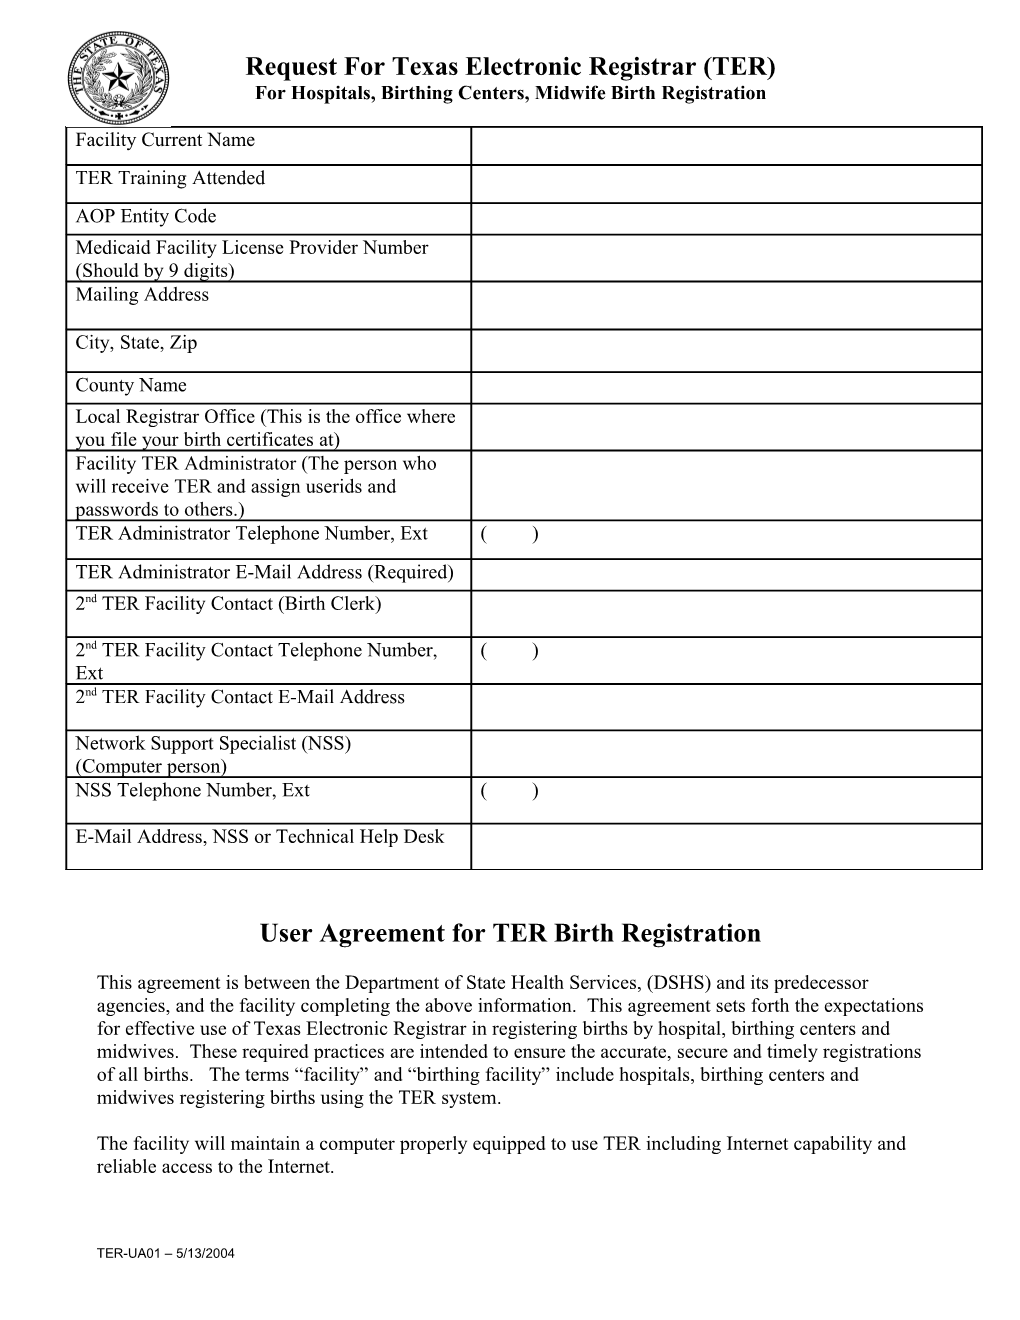 Request for Texas Electronic Registrar (TER)